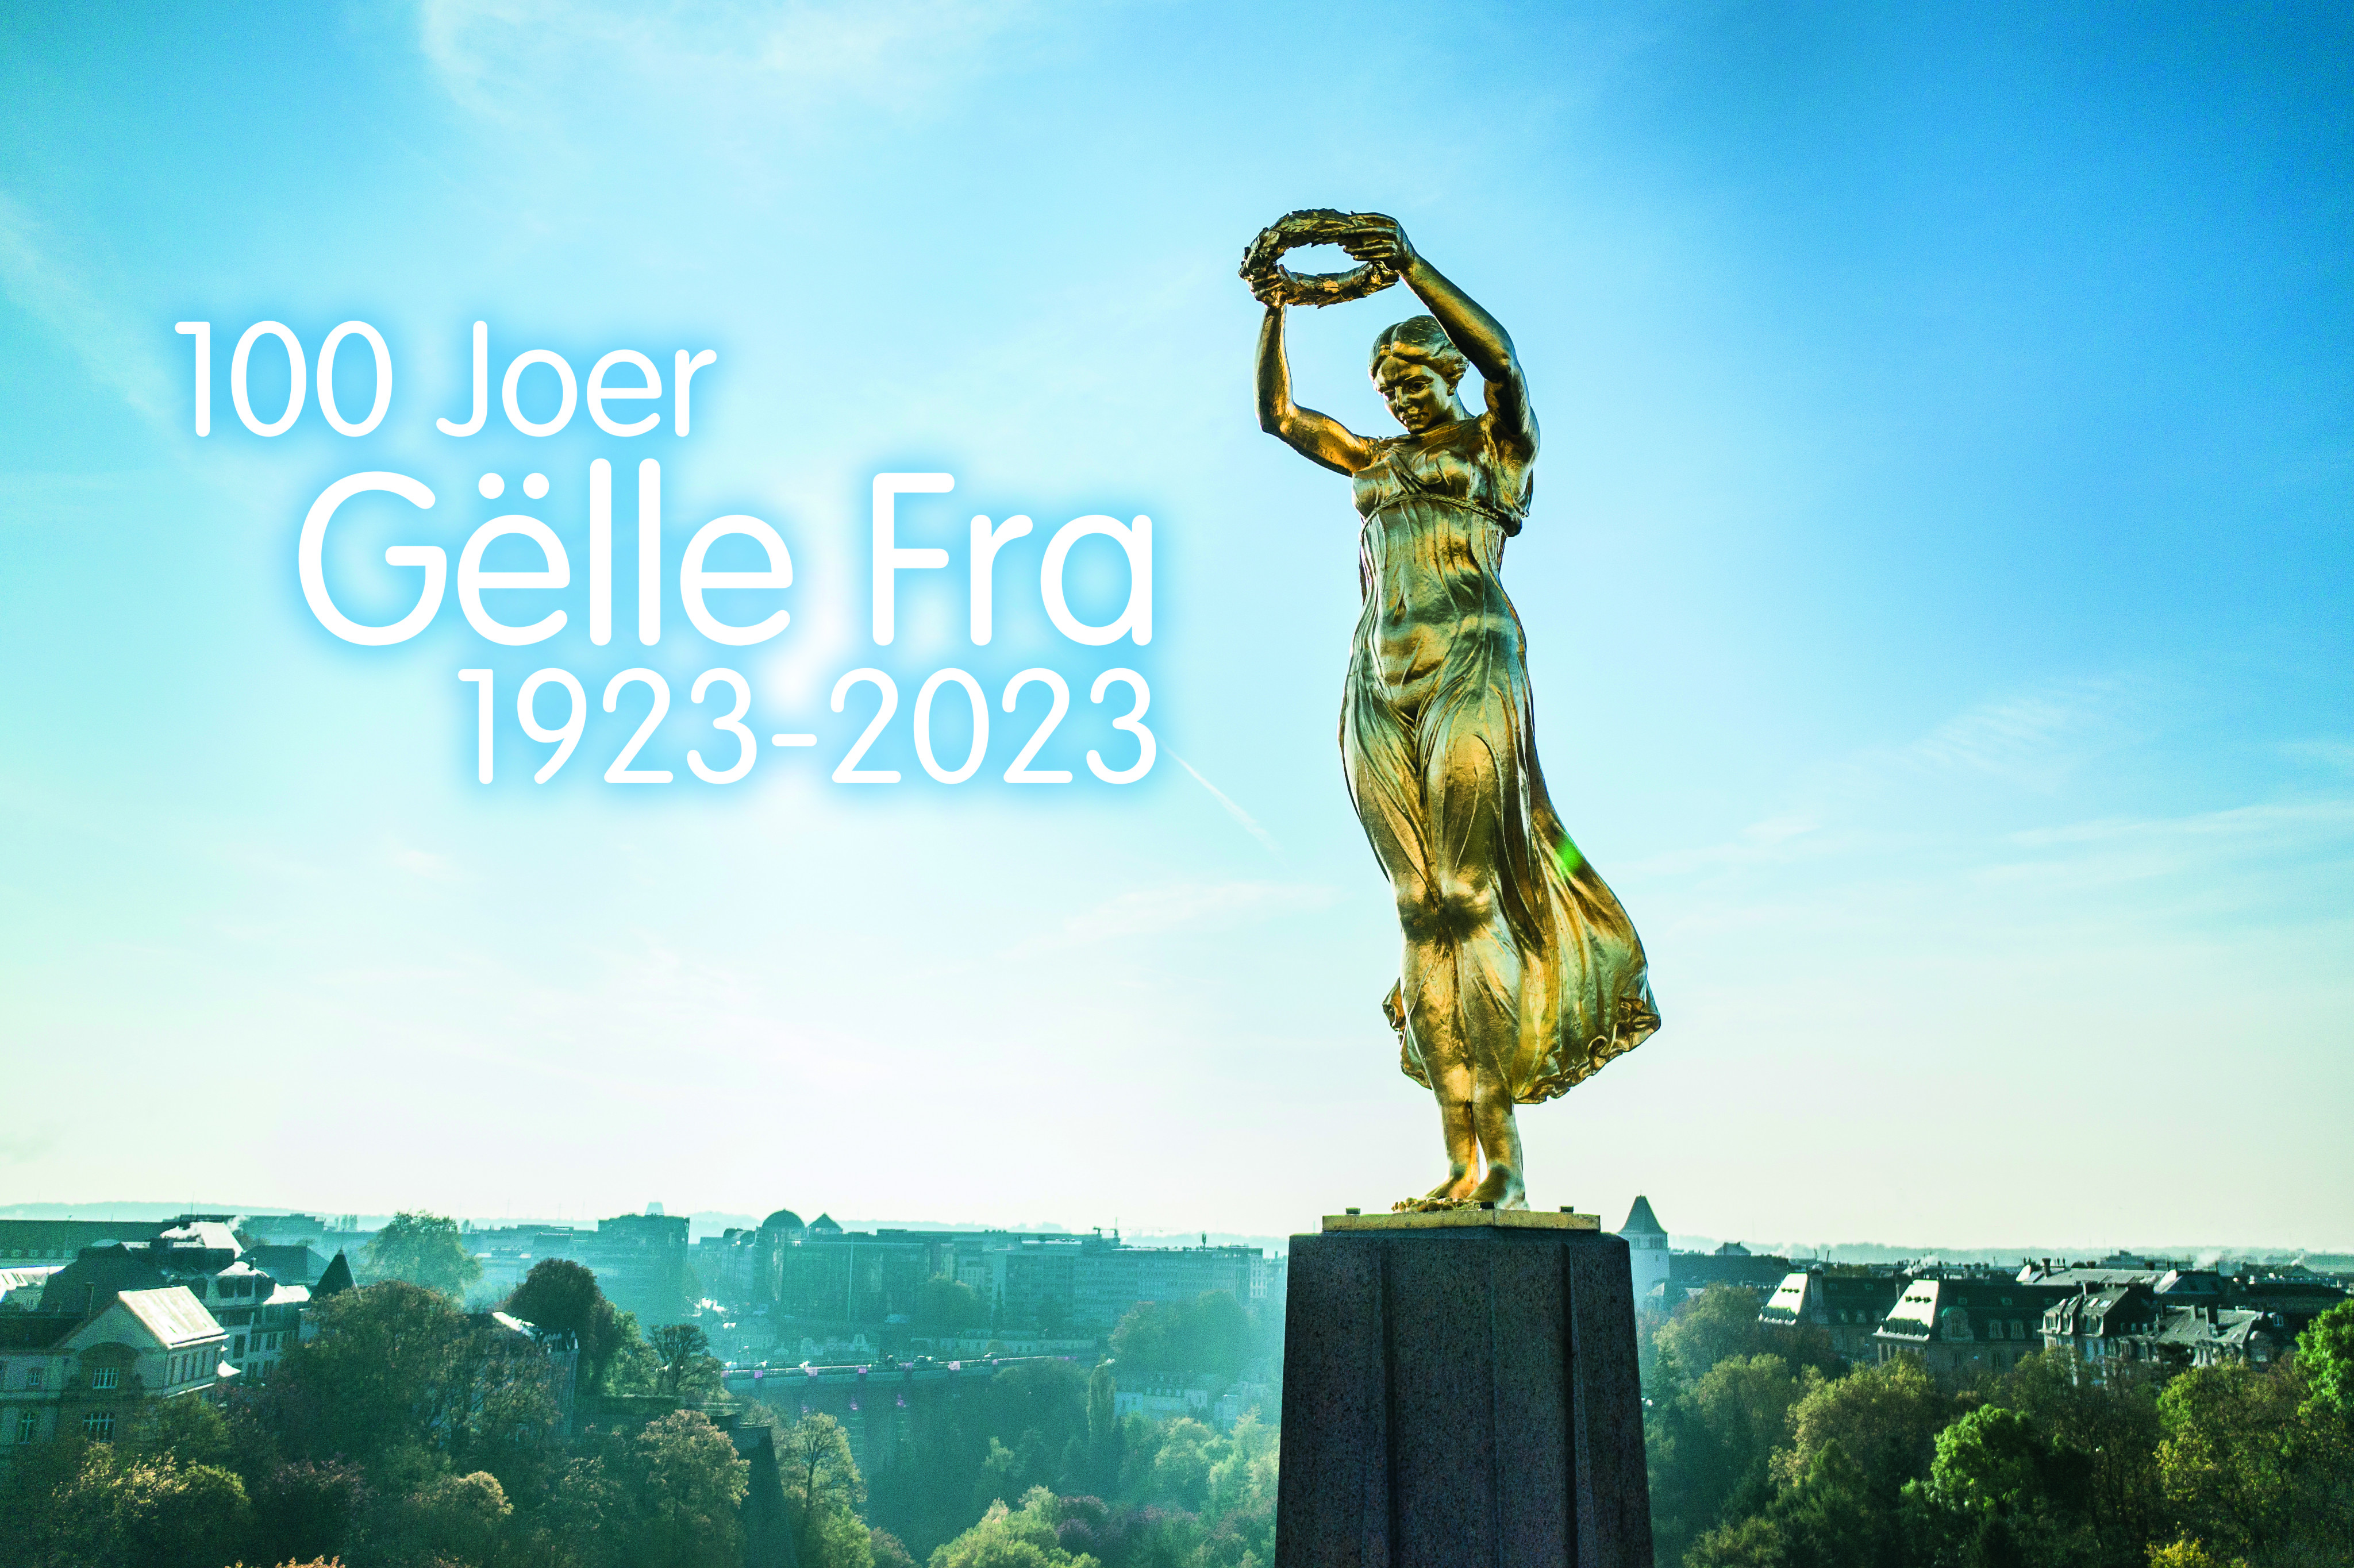 Centenary of Gëlle Fra - Visit Luxembourg City